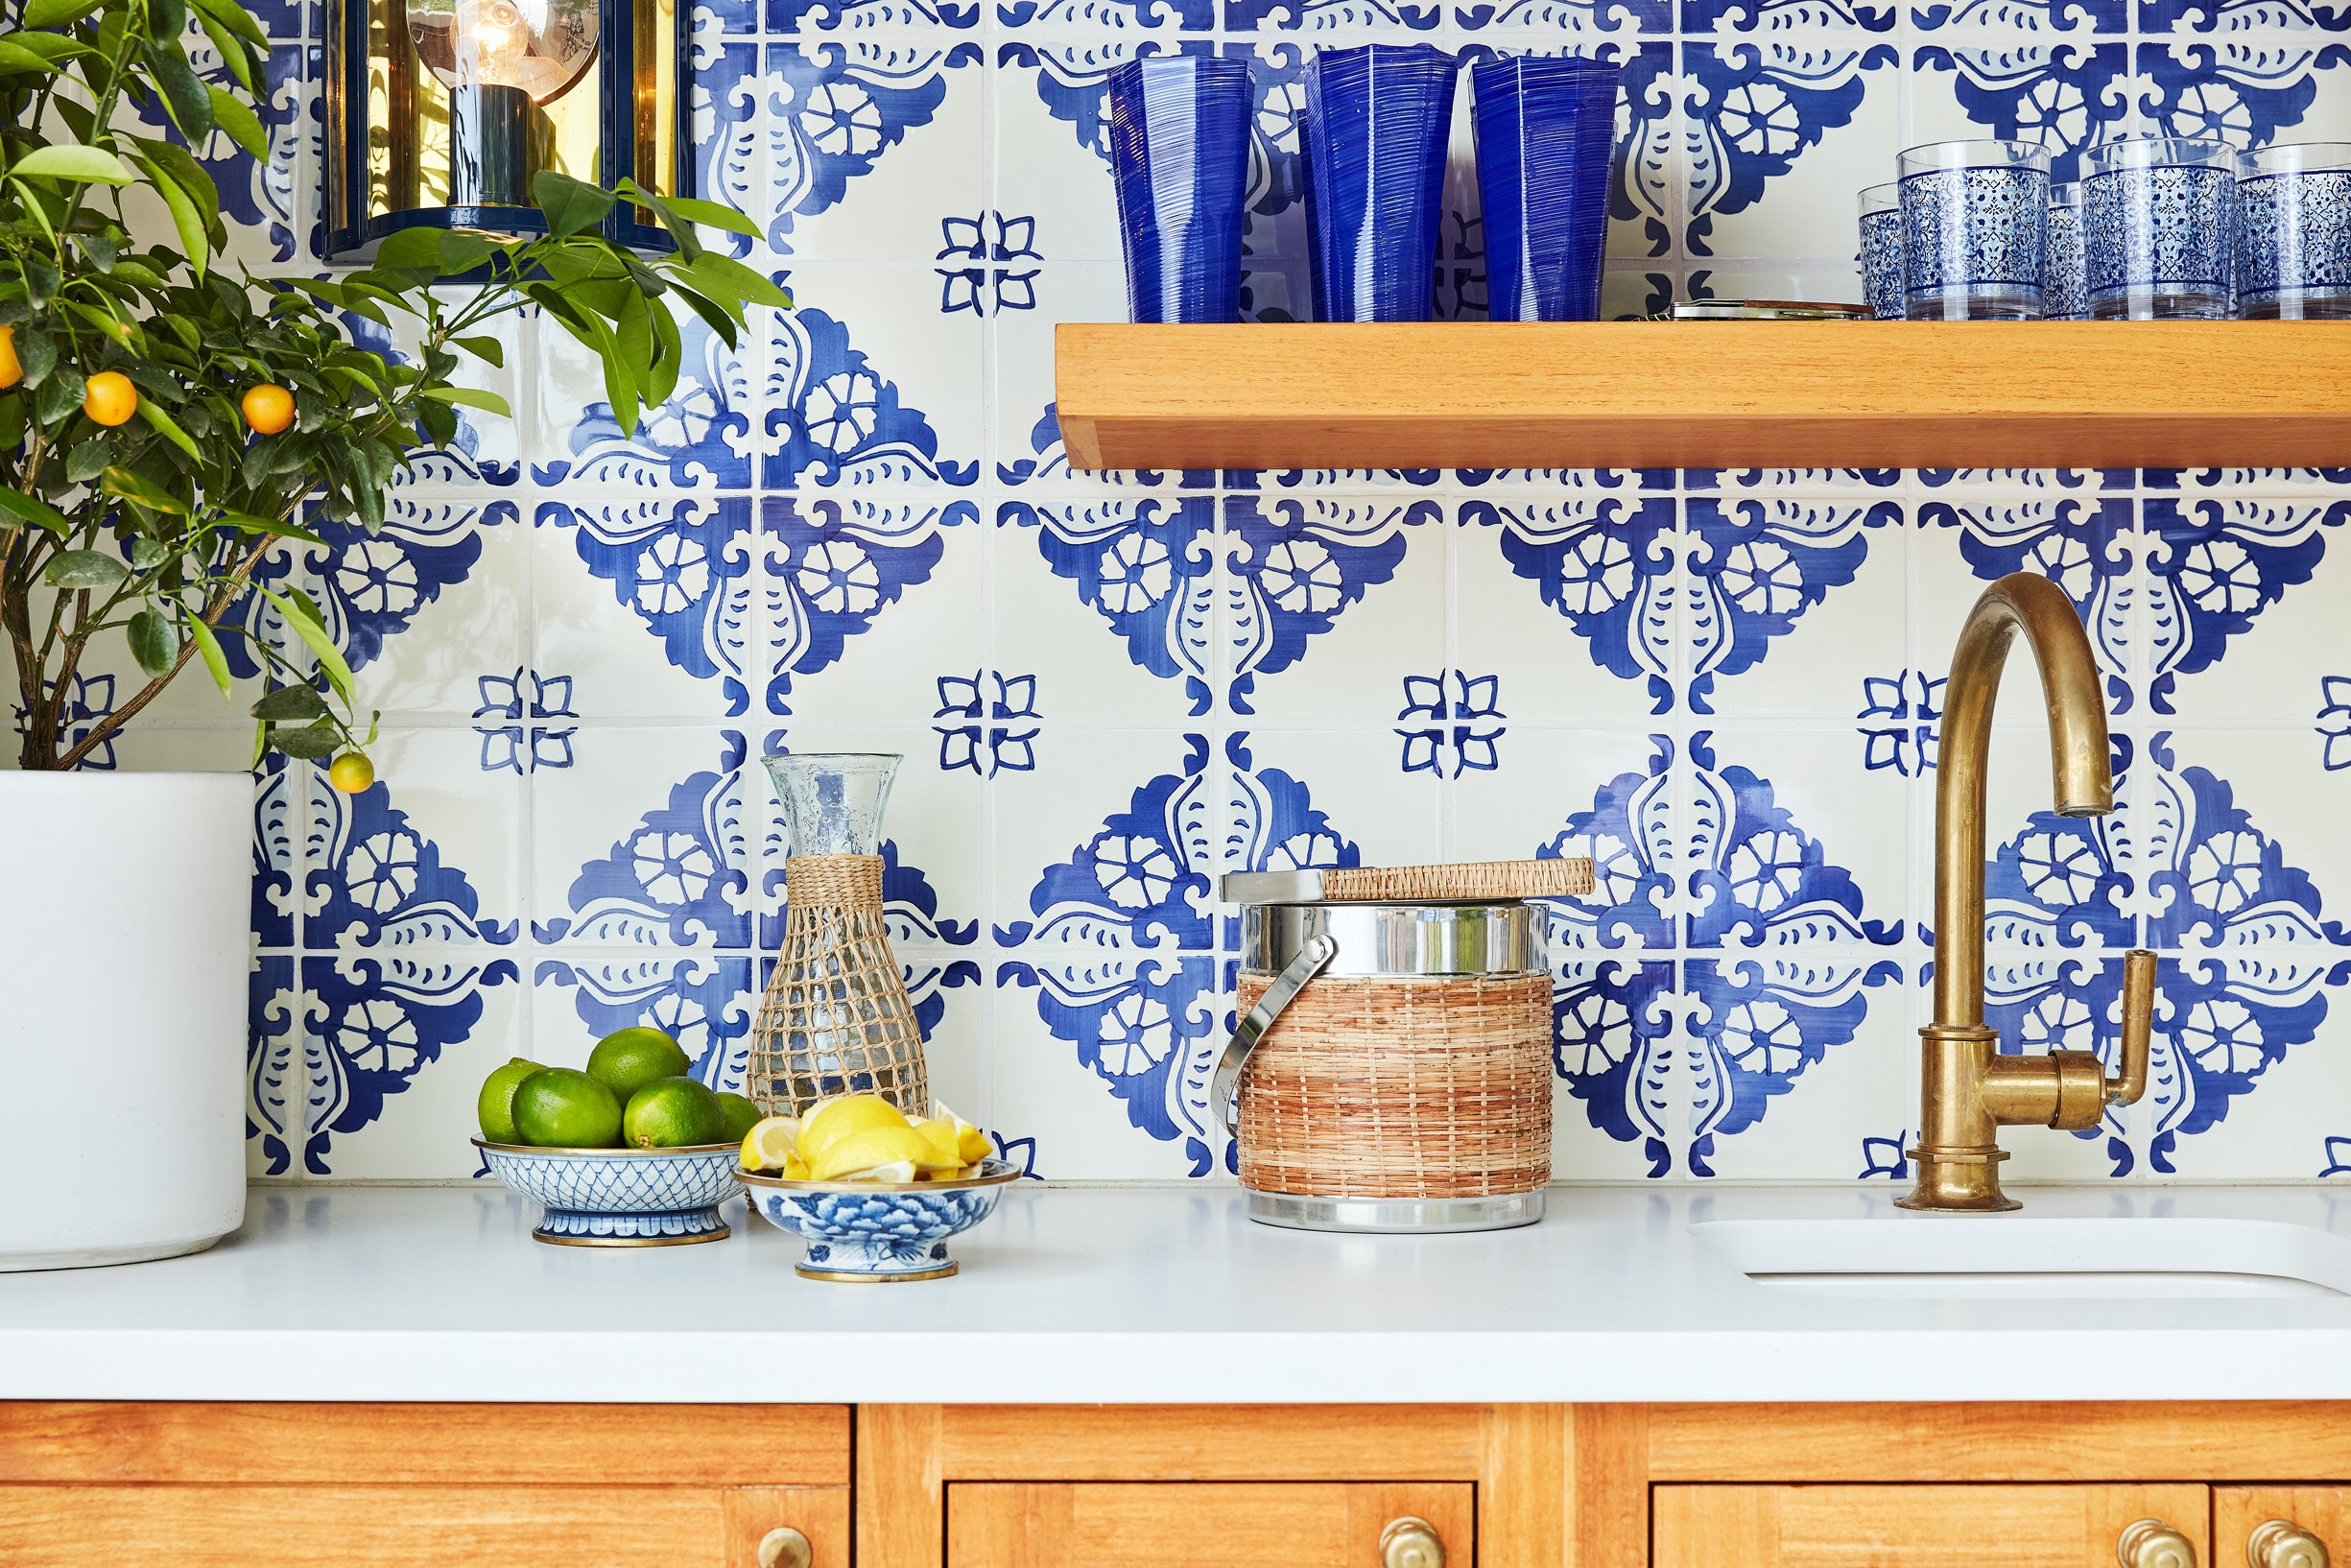 Brighten your kitchen with these tiles from Everett and Blue